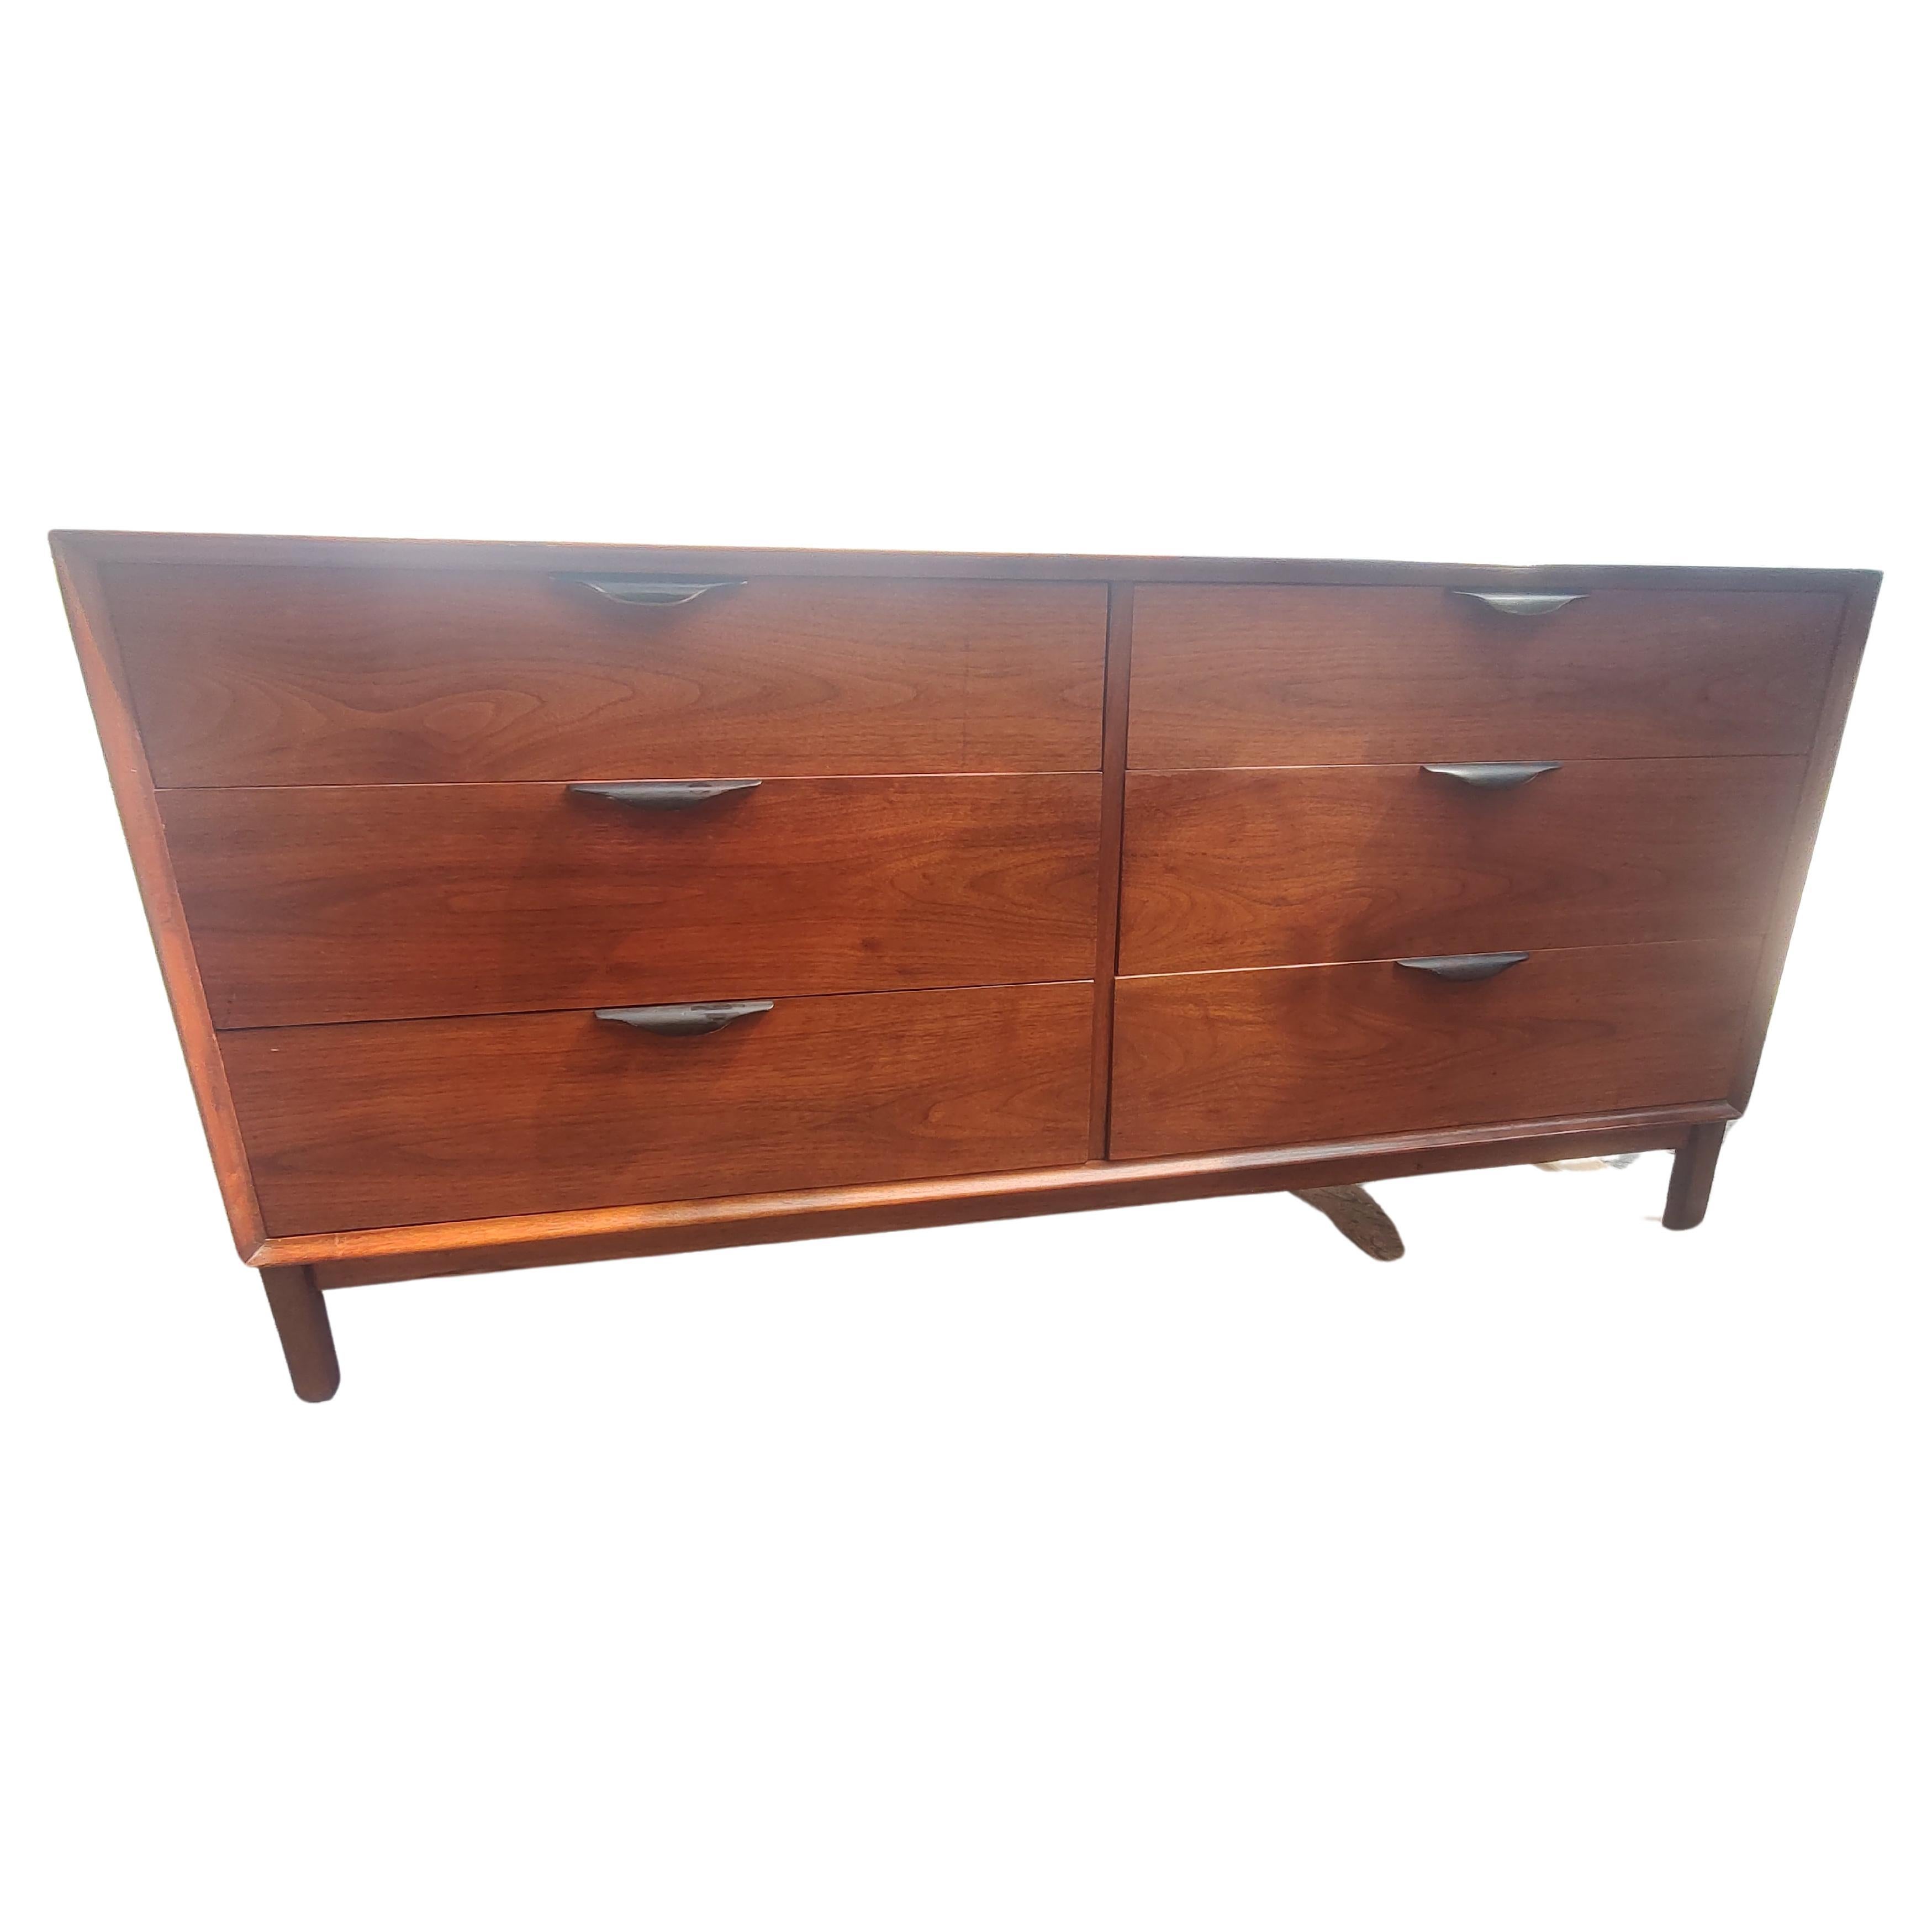 Spacious simple and elegant six drawer dresser by Dillingham in walnut. Beautiful sculpted ebonized drawer pulls are a design feature. Top right corner has an ink splatter stain.  Some ink splatter on side. See pics. Otherwise in very good vintage